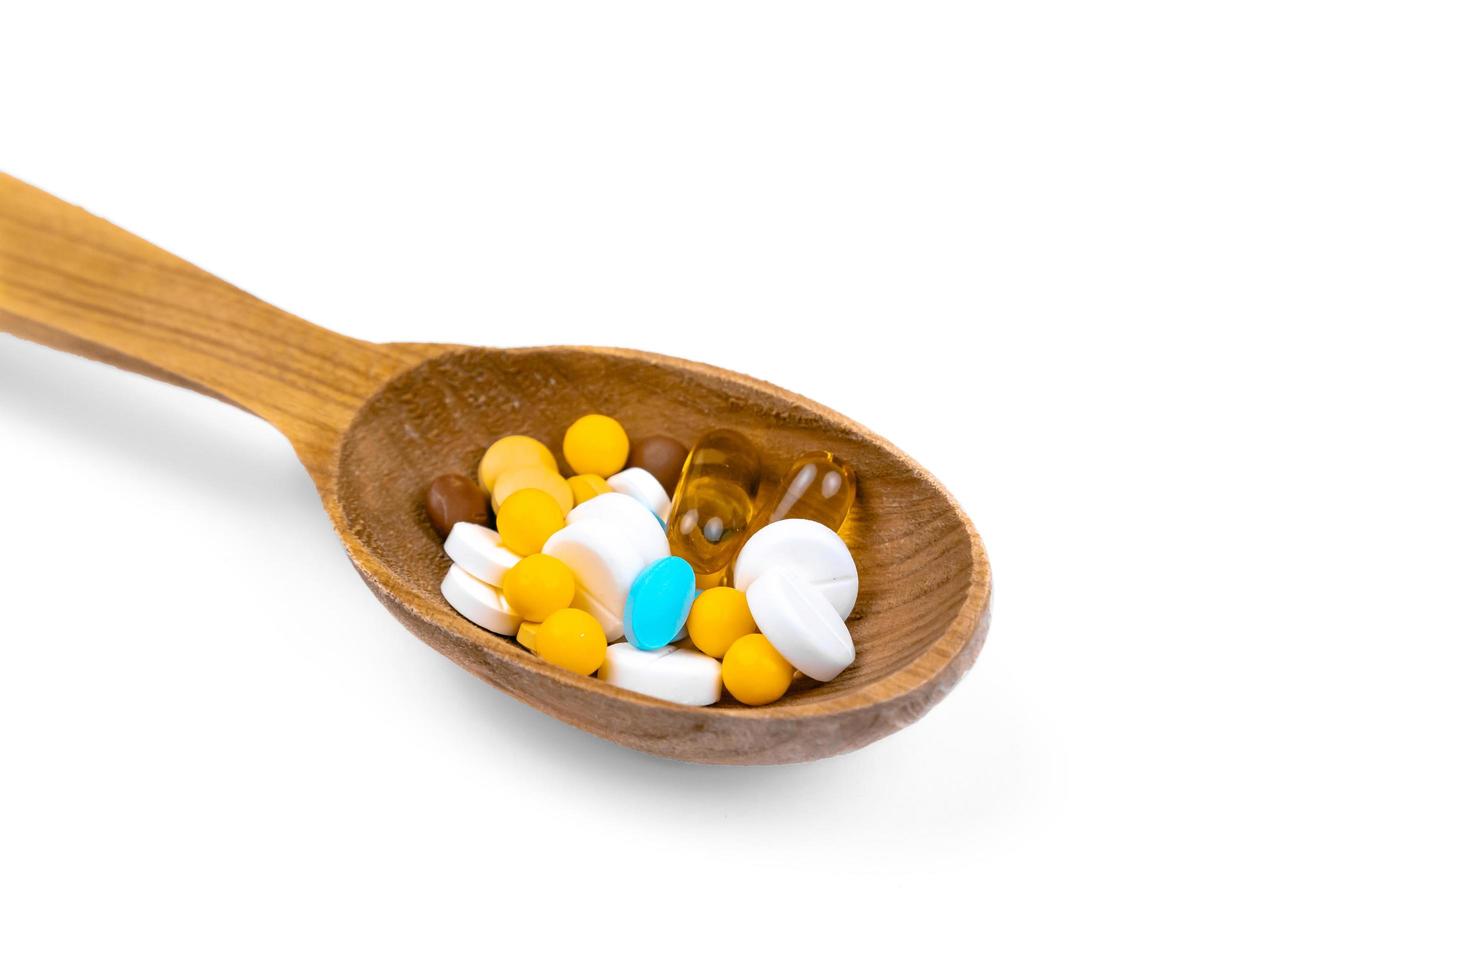 Medicine pills and drugs in wood spoon on white background with copy space photo